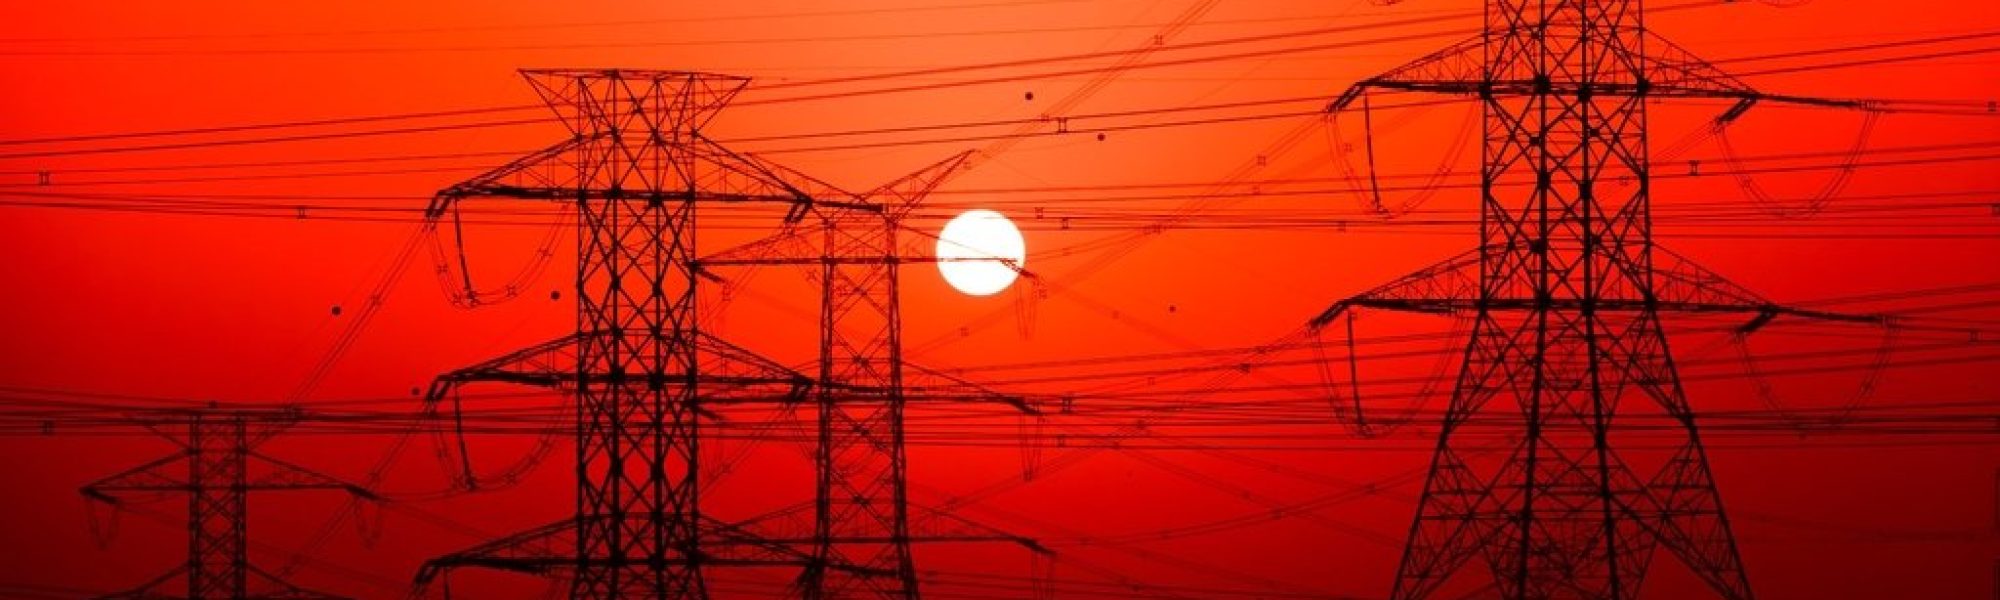 Taxpayer-funded electricity rate relief for downstate Illinois is on the table